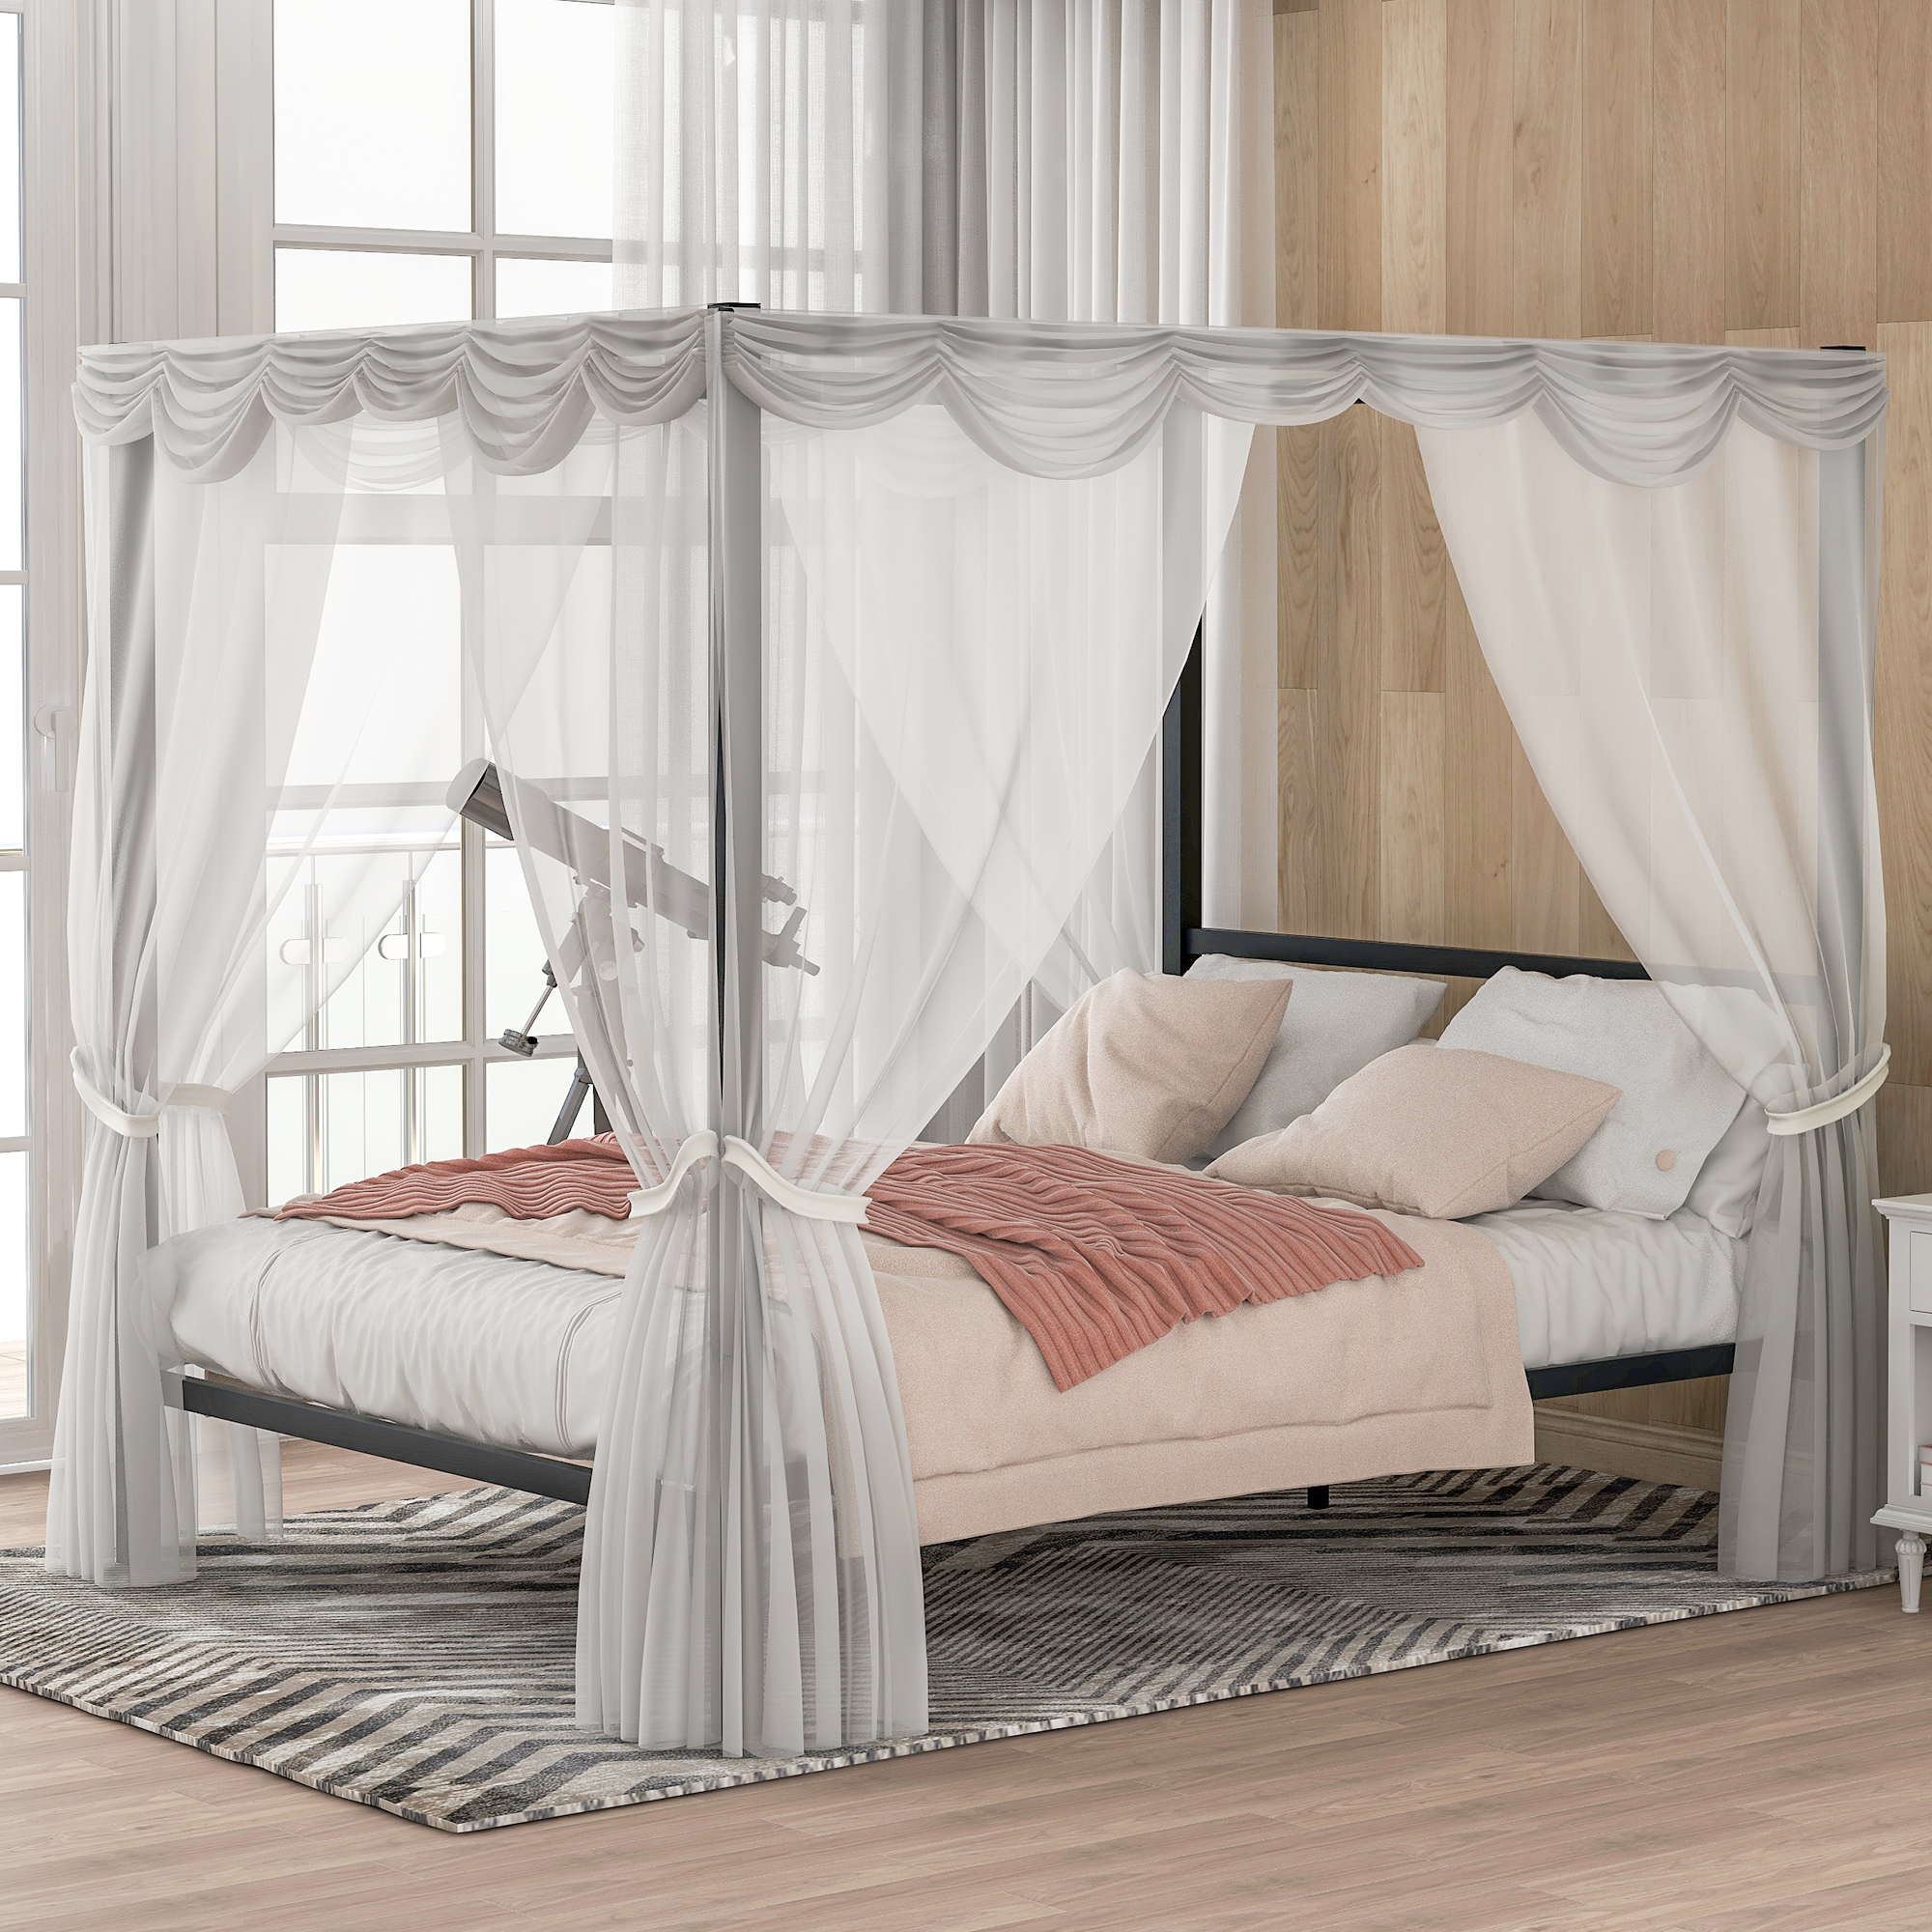 Metal Canopy Bed With Sy Frame, King Size Metal Canopy Bed Frame